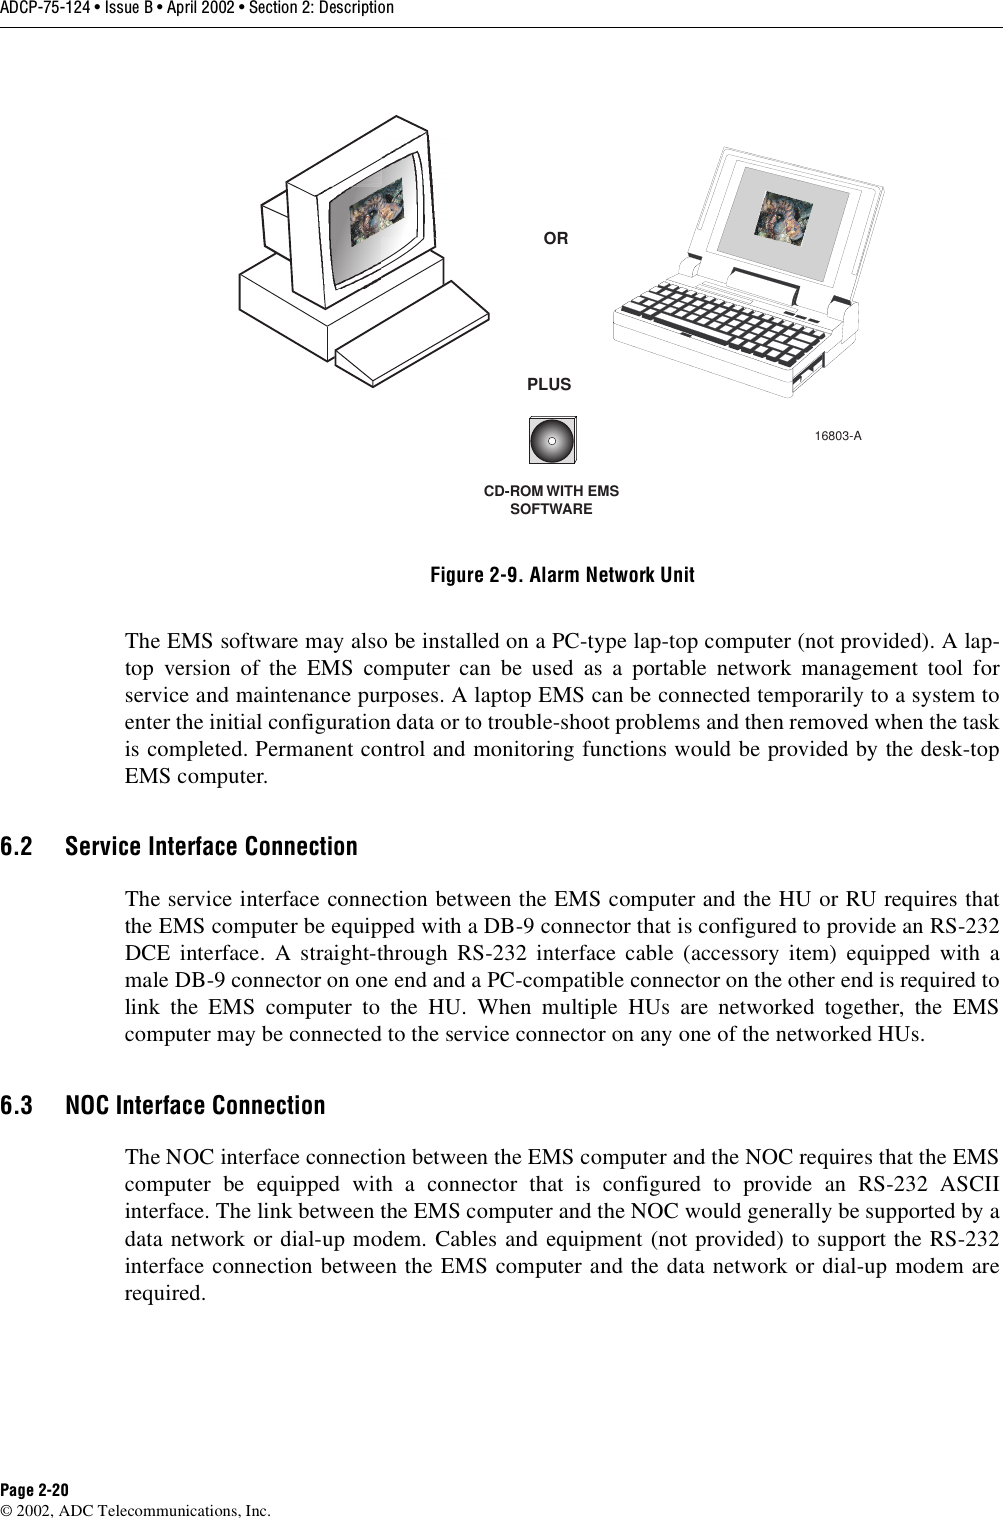 ADCP-75-124 • Issue B • April 2002 • Section 2: DescriptionPage 2-20©2002, ADC Telecommunications, Inc.Figure 2-9. Alarm Network UnitThe EMS software may also be installed on aPC-type lap-top computer (not provided). Alap-top version of the EMS computer can be used as aportable network management tool forservice and maintenance purposes. Alaptop EMS can be connected temporarily to asystem toenter the initial configuration data or to trouble-shoot problems and then removed when the taskis completed. Permanent control and monitoring functions would be provided by the desk-topEMS computer.6.2 Service Interface ConnectionThe service interface connection between the EMS computer and the HU or RU requires thatthe EMS computer be equipped with aDB-9 connector that is configured to provide an RS-232DCE interface. Astraight-through RS-232 interface cable (accessory item) equipped with amale DB-9 connector on one end and aPC-compatible connector on the other end is required tolink the EMS computer to the HU. When multiple HUs are networked together, the EMScomputer may be connected to the service connector on any one of the networked HUs.6.3 NOC Interface ConnectionThe NOC interface connection between the EMS computer and the NOC requires that the EMScomputer be equipped with aconnector that is configured to provide an RS-232 ASCIIinterface. The link between the EMS computer and the NOC would generally be supported by adata network or dial-up modem. Cables and equipment (not provided) to support the RS-232interface connection between the EMS computer and the data network or dial-up modem arerequired.CD-ROM WITH EMSSOFTWAREORPLUS16803-A